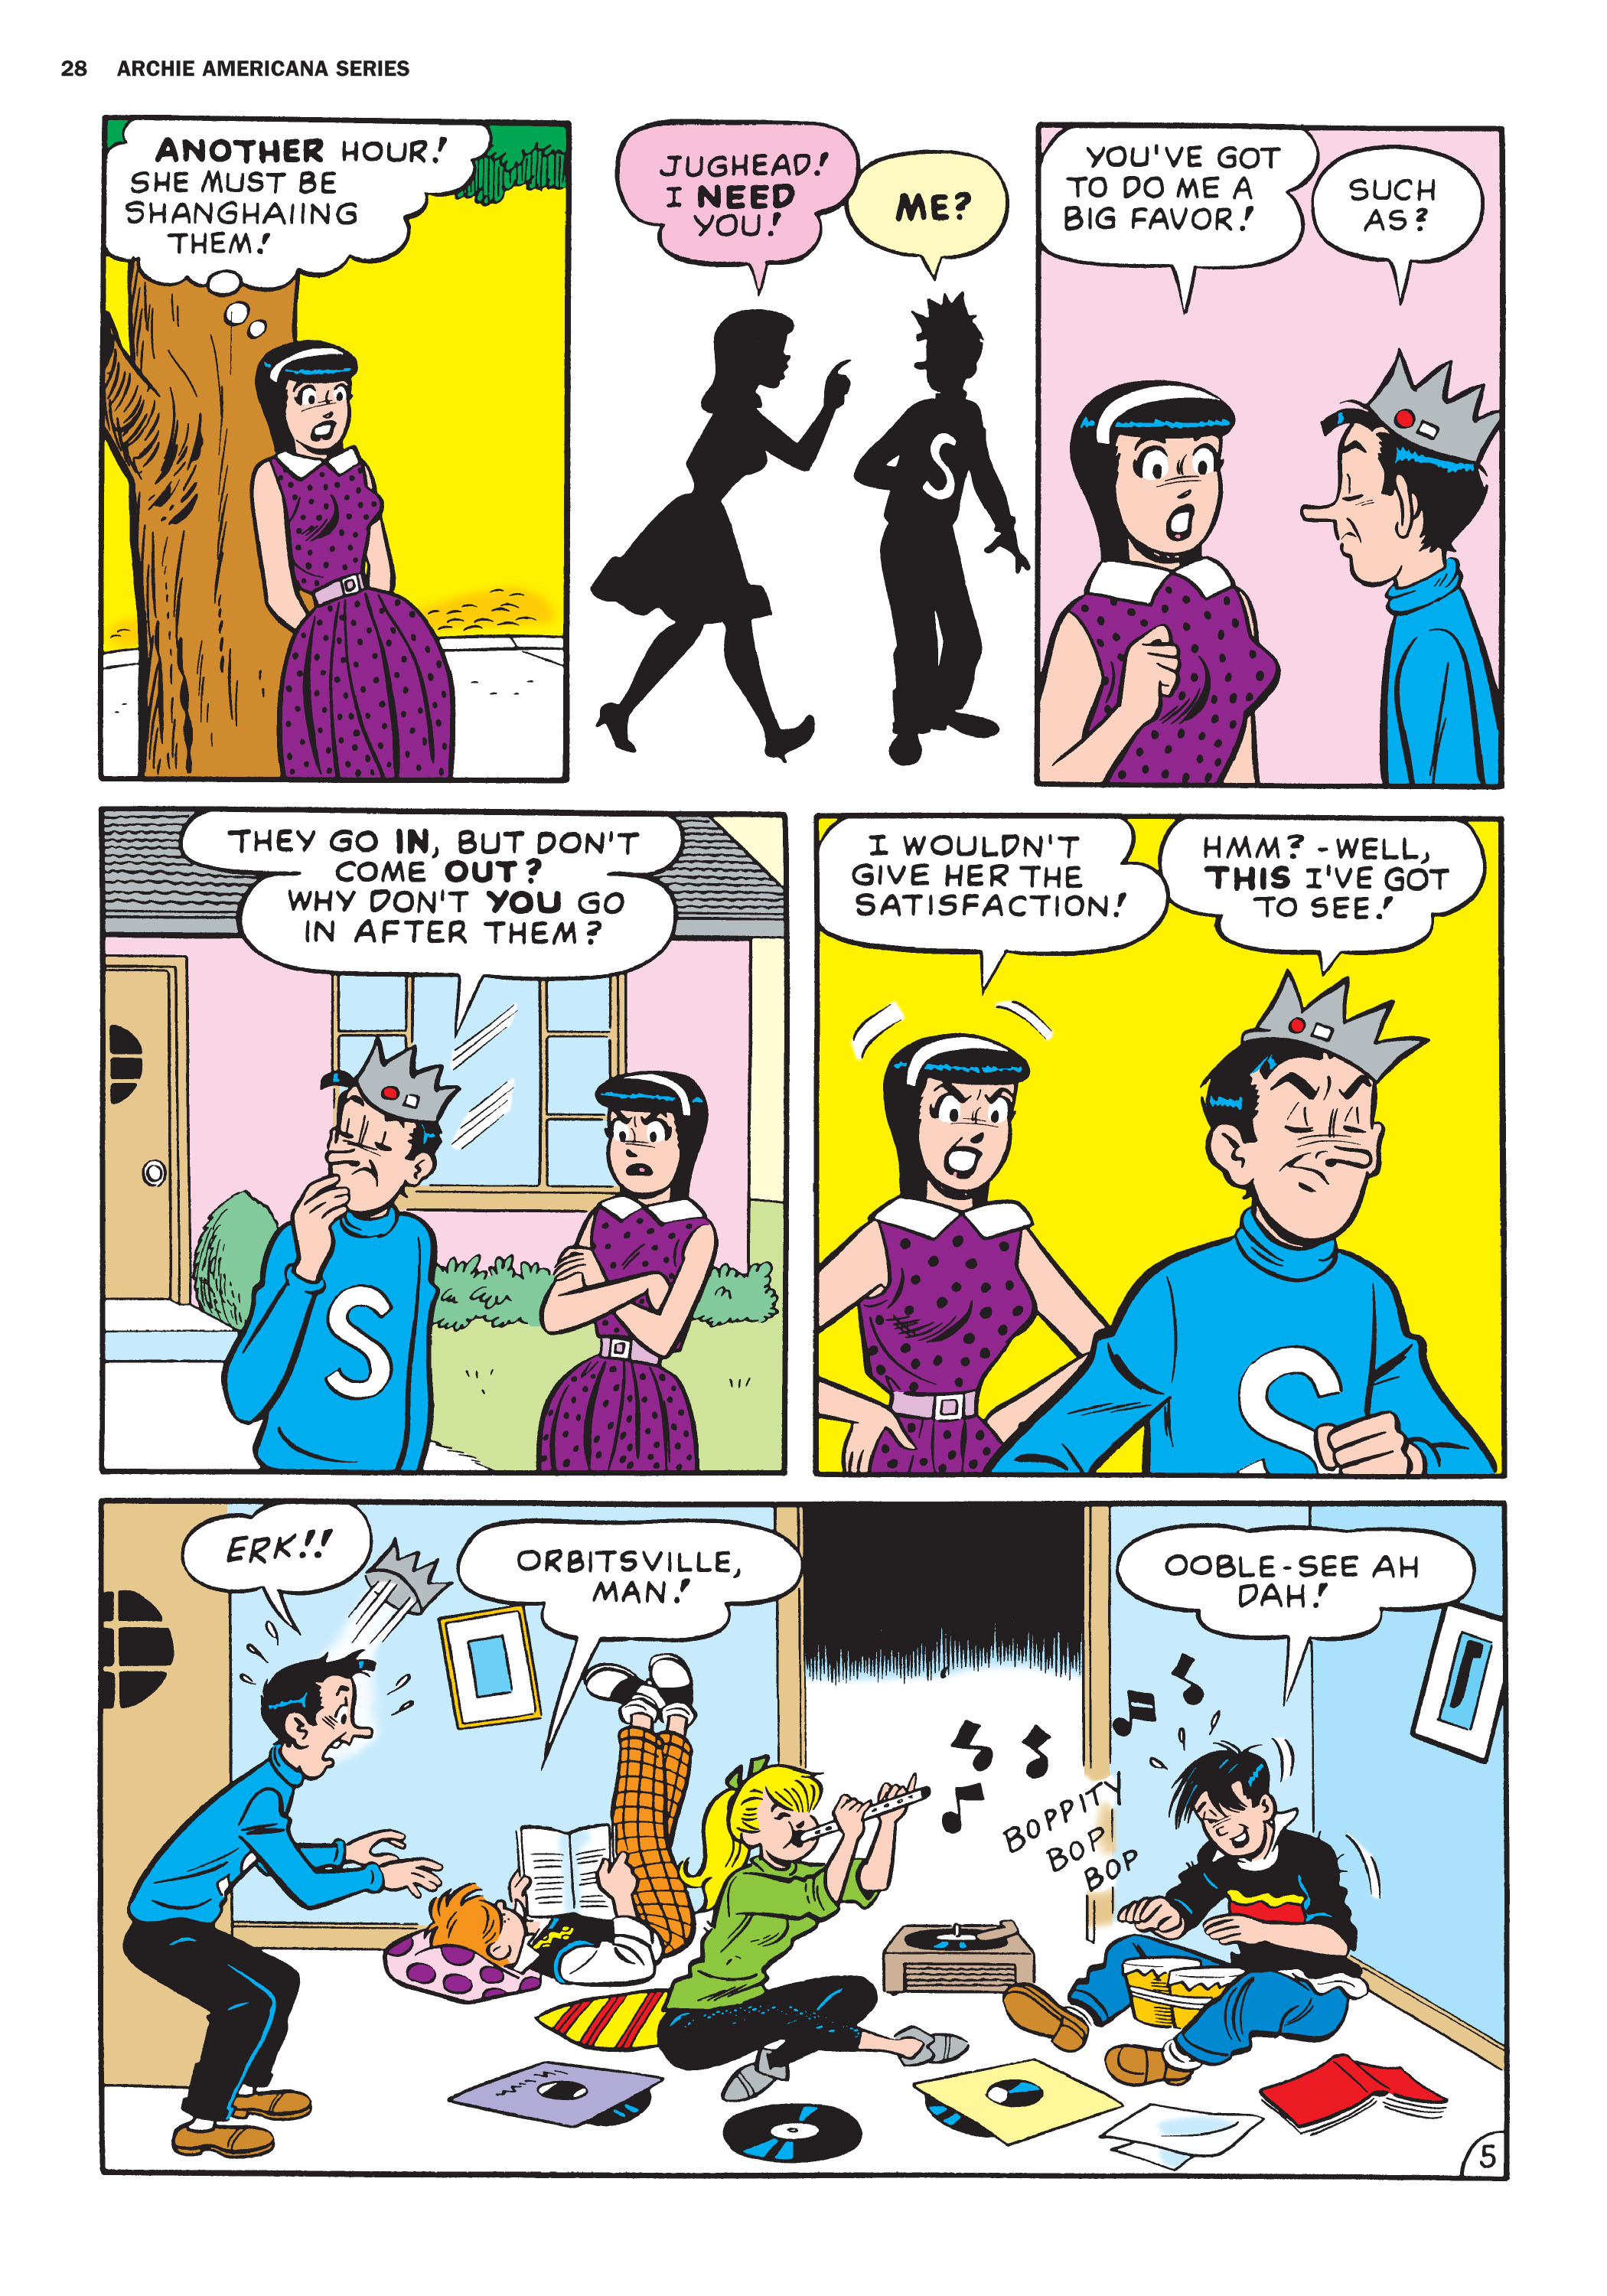 Read online Archie Americana Series comic -  Issue # TPB 8 - 29